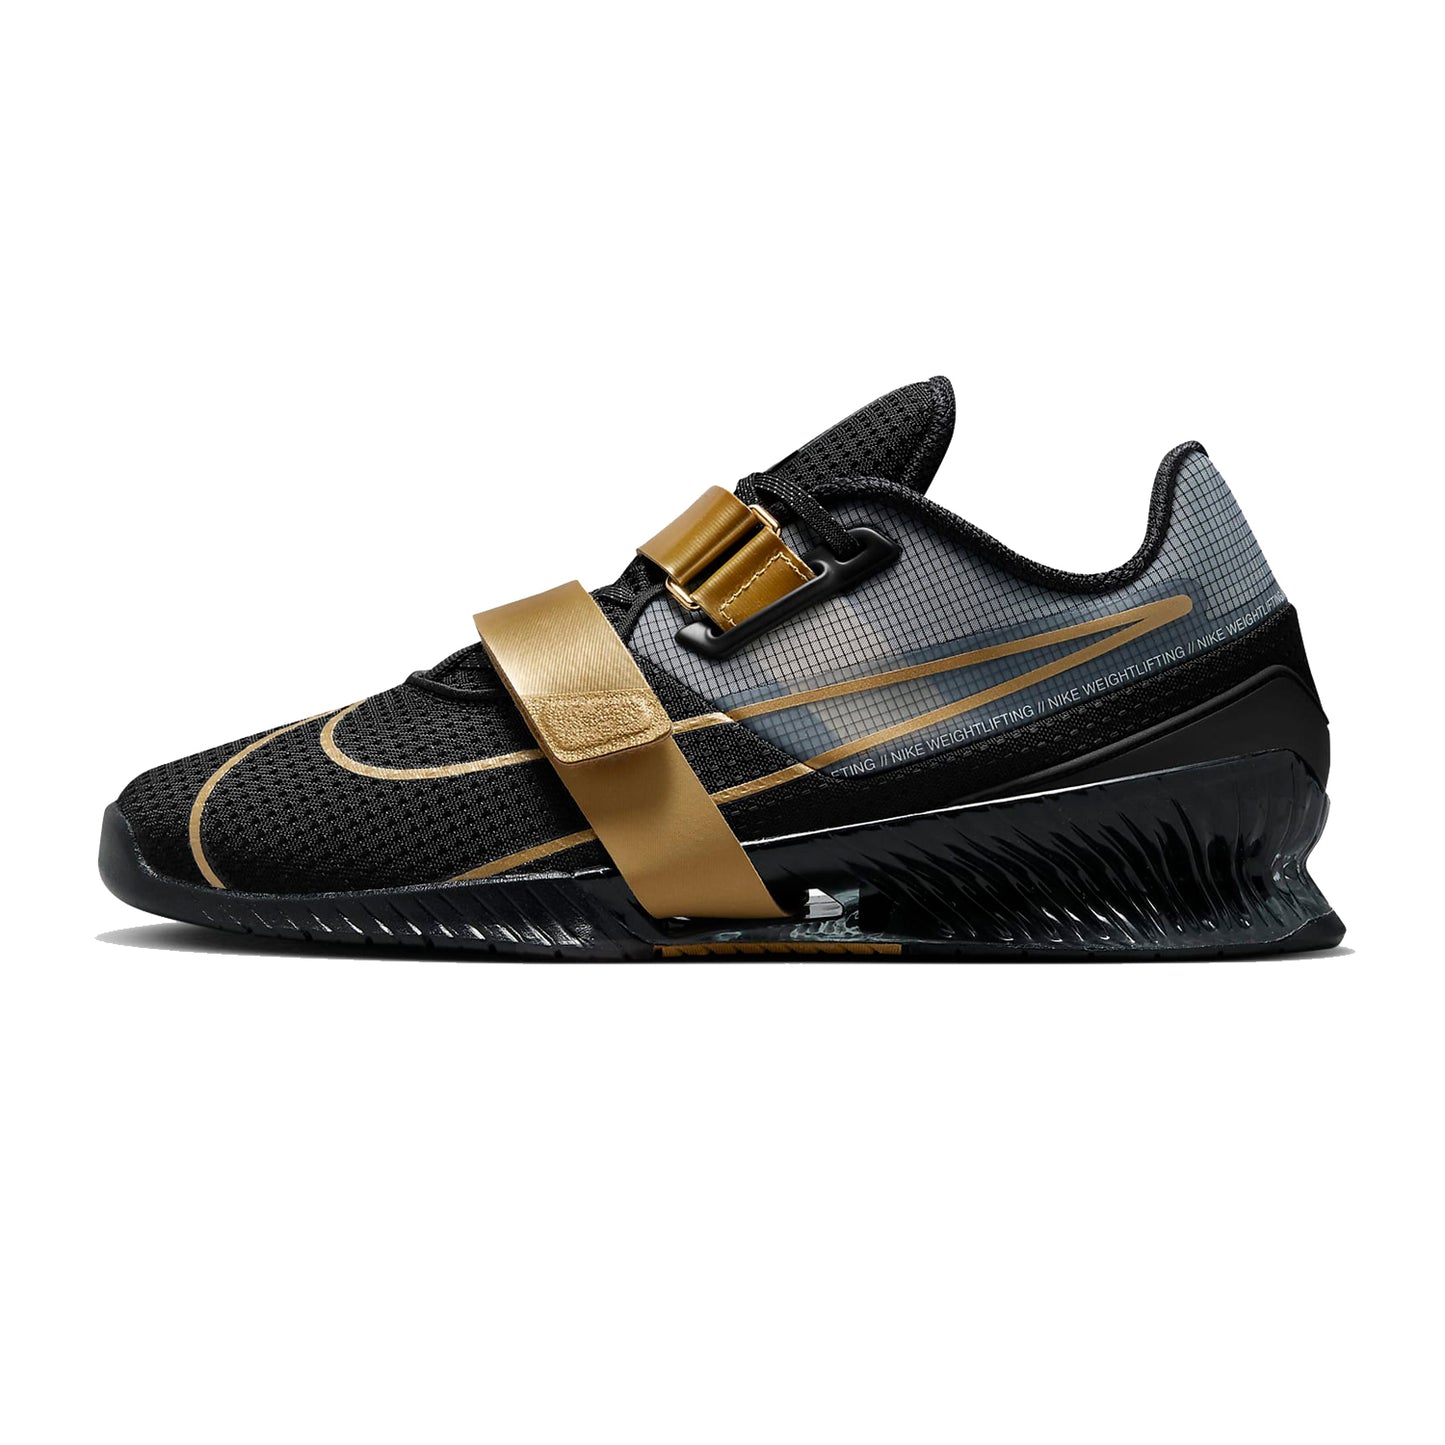 Nike Romaleos 4 weightlifting shoe in Black / Gold